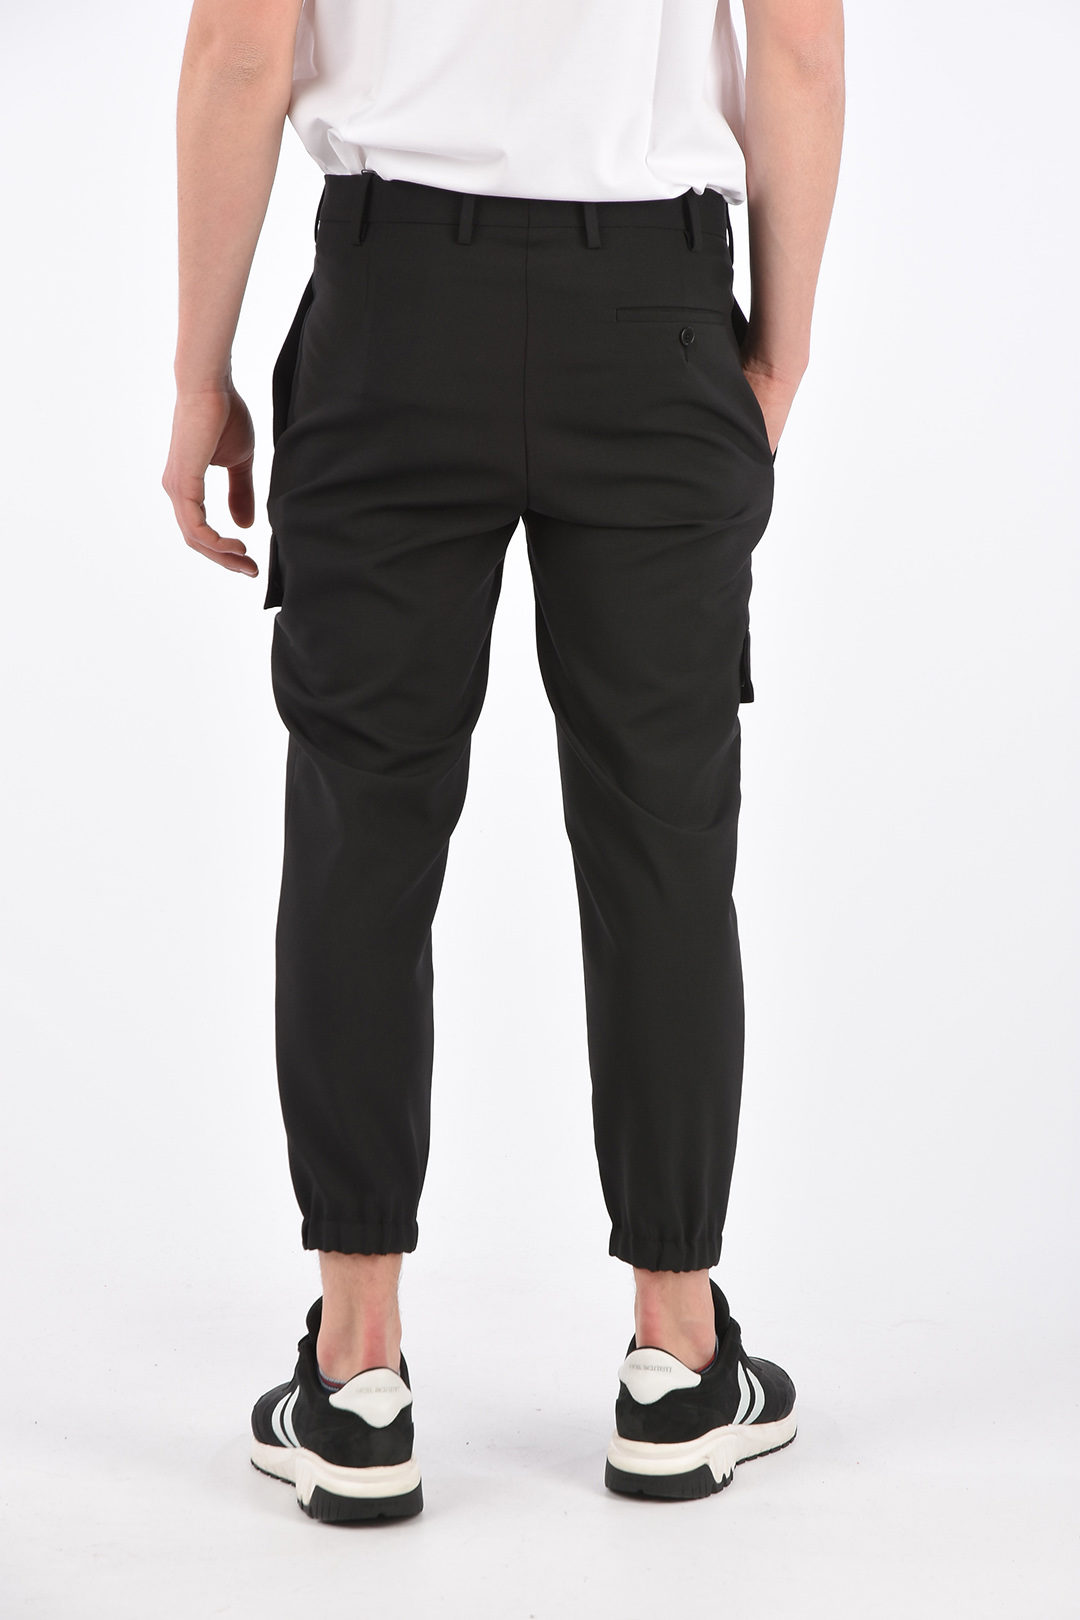 White Mountaineering Cargo Pants with Elastic Ankle Band men - Glamood  Outlet